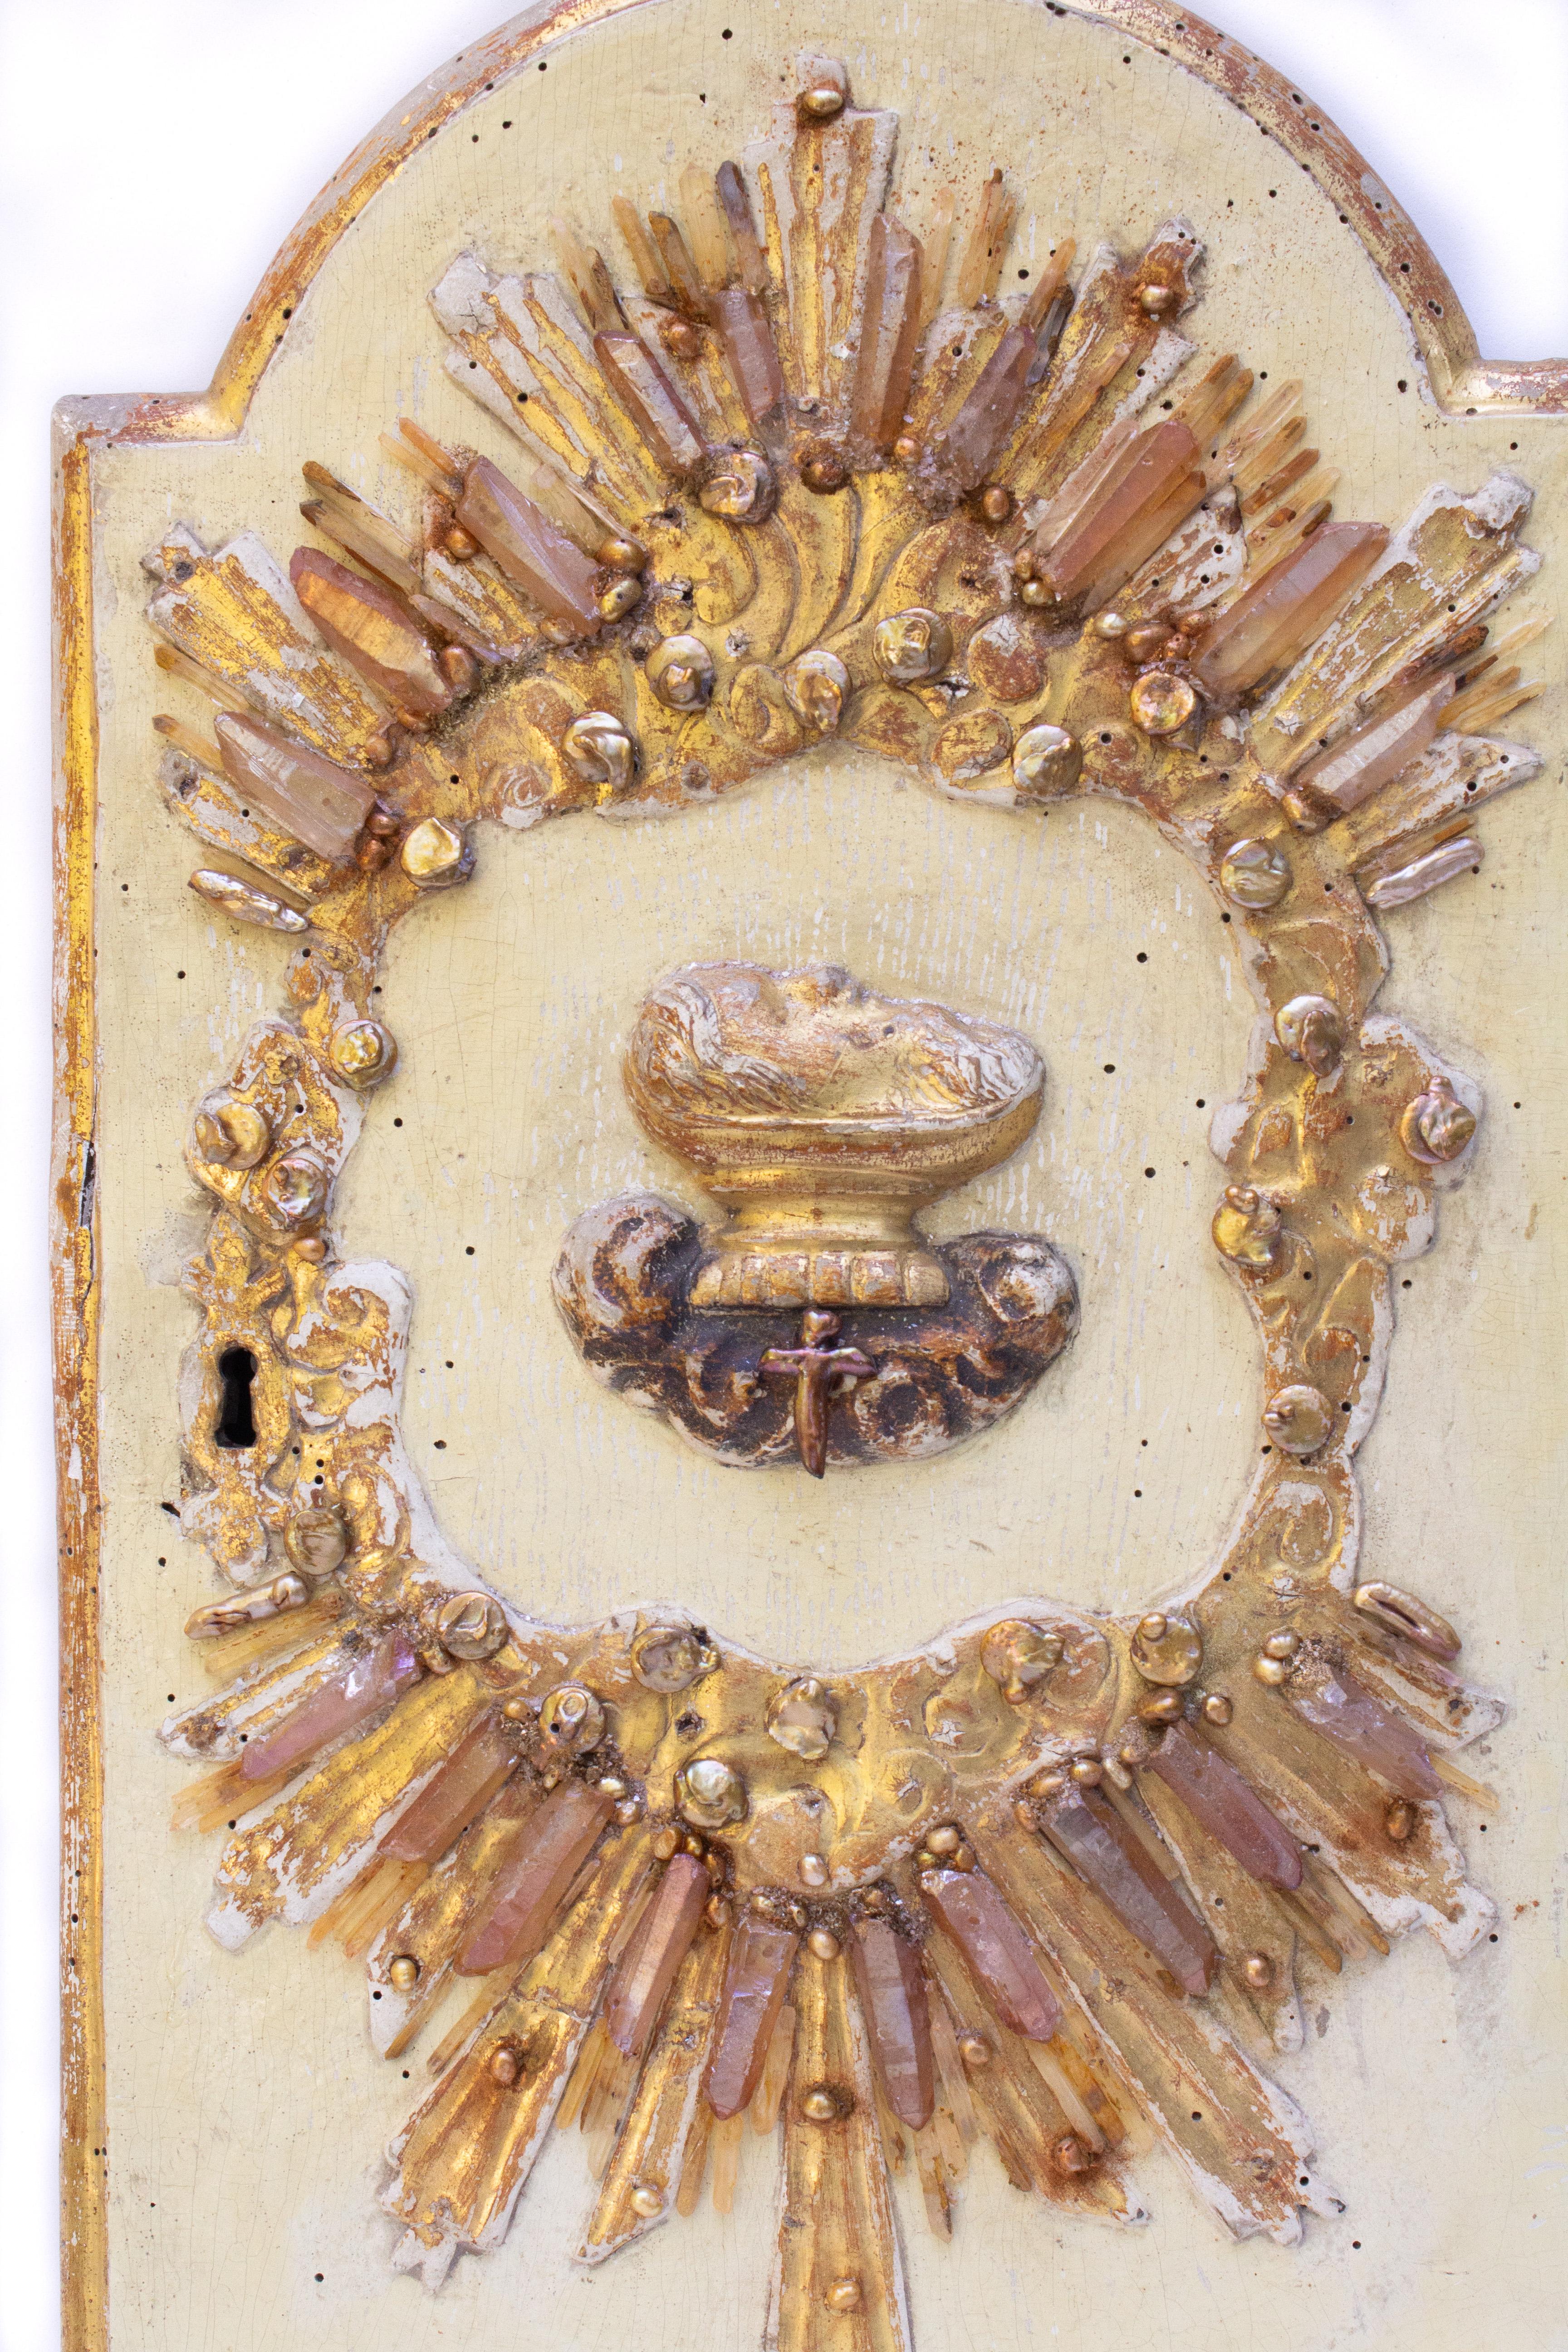 18th century Italian gilded and hand-carved wood tabernacle door with natural forming baroque pearls and tangerine quartz crystal points. This door once belonged on a tabernacle which served the eucharist in a historical Italian church. The center